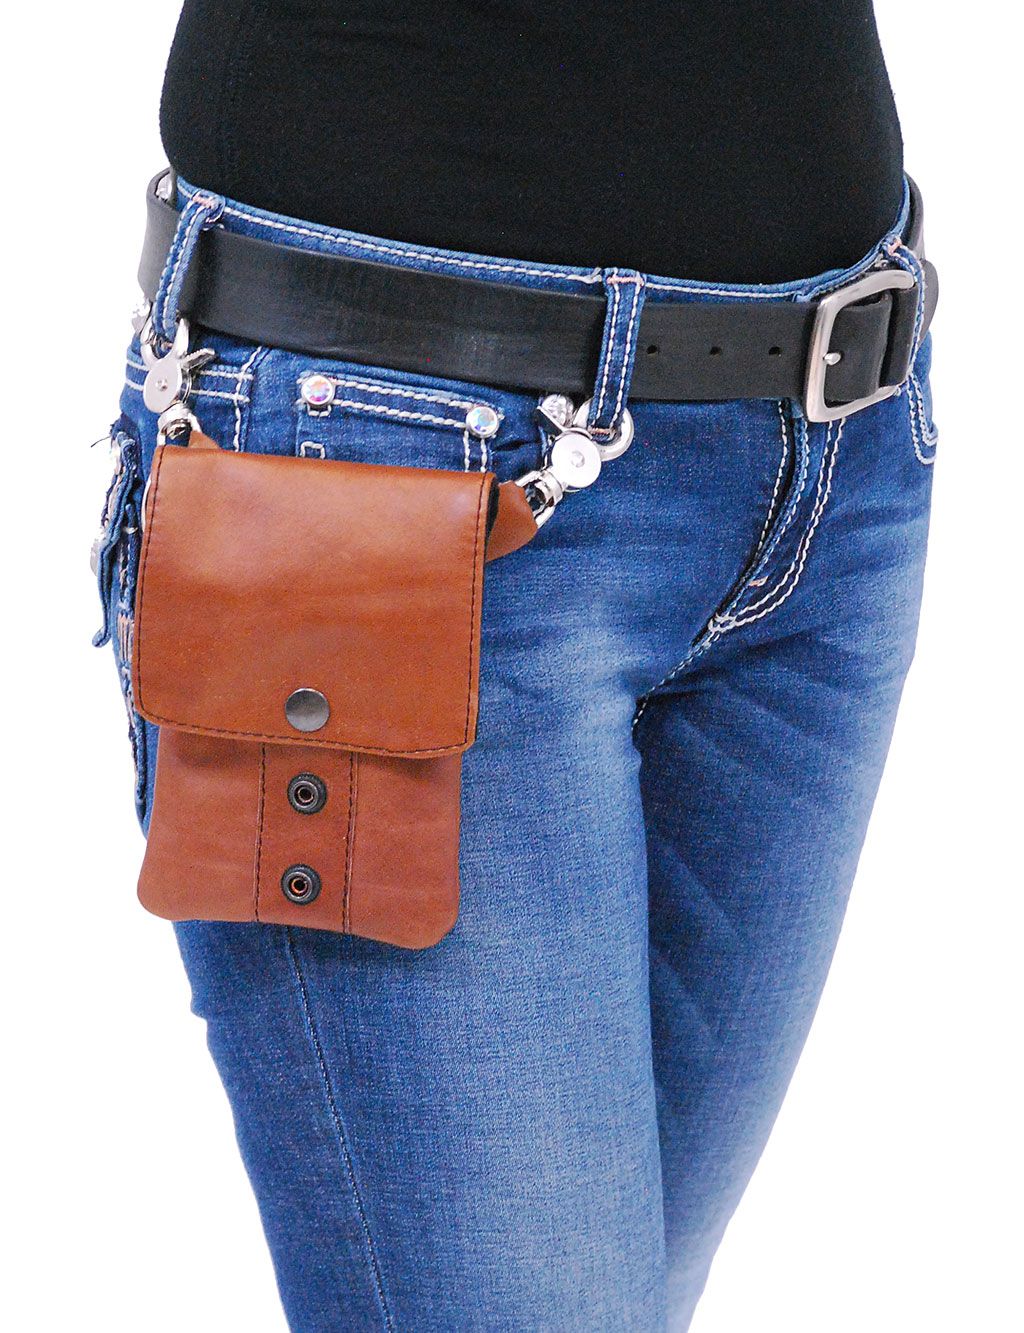 biker wearing a brown leather cell phone case